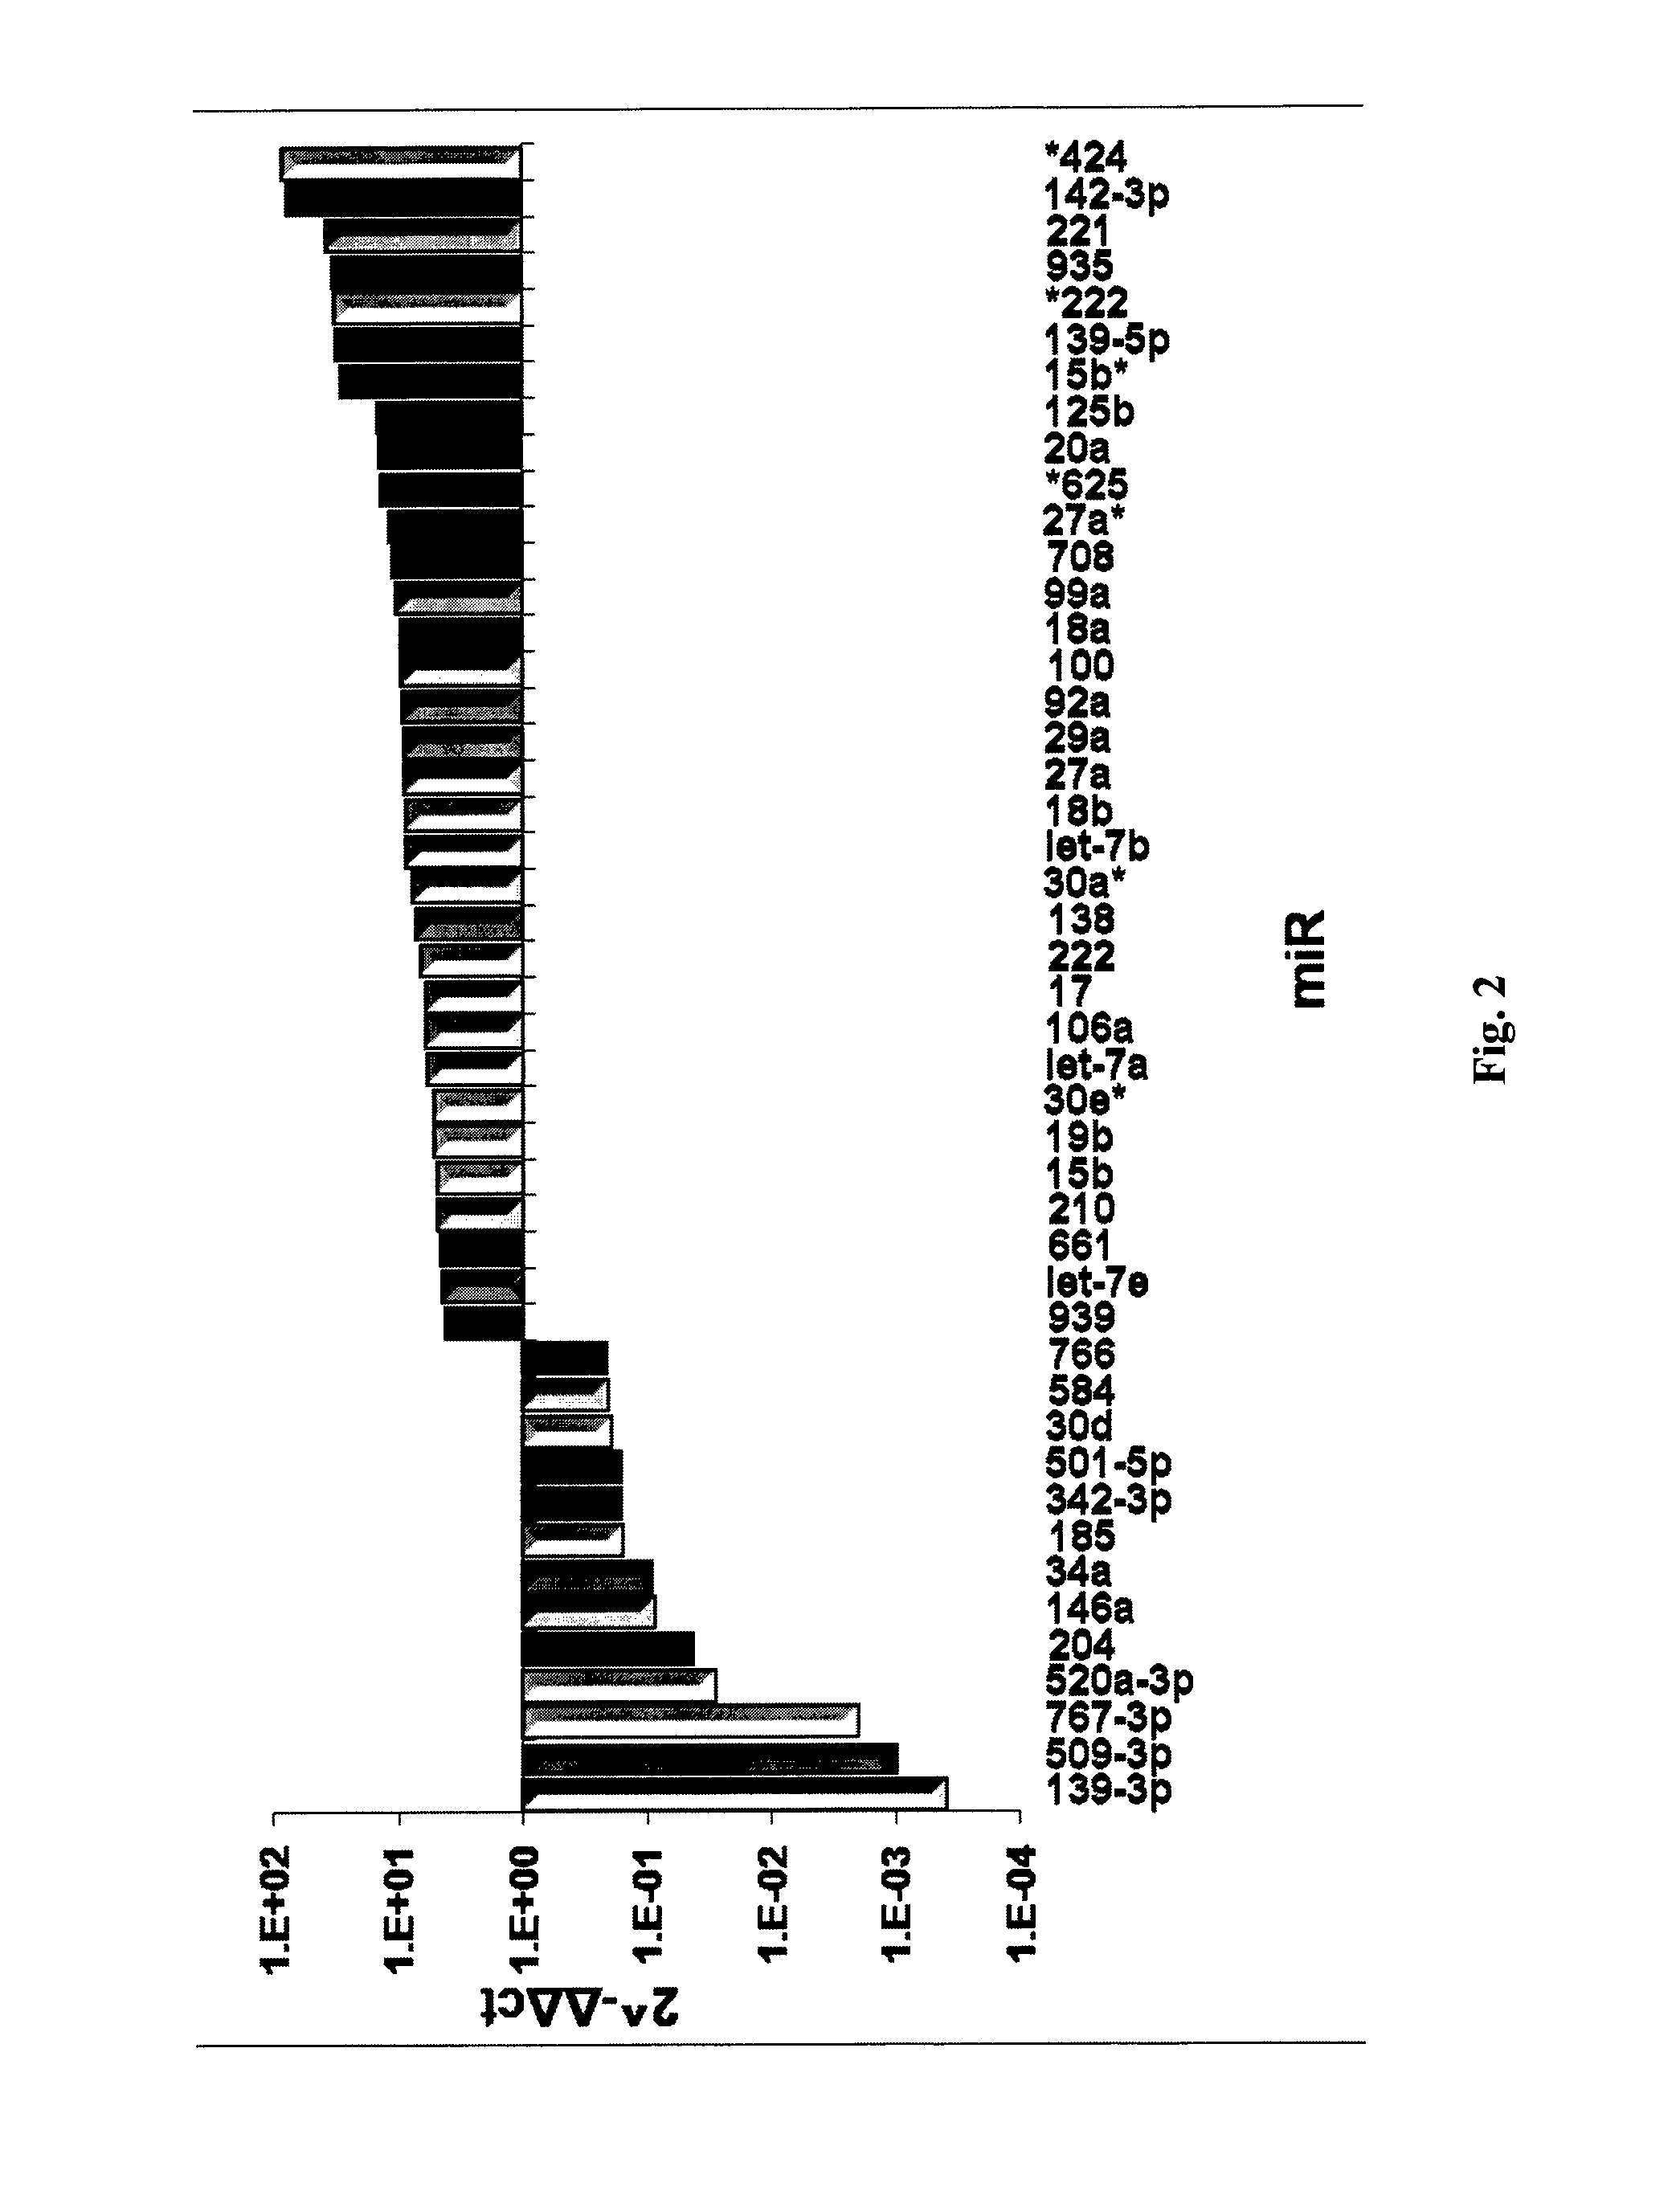 Microrna patterns for the diagnosis, prognosis and treatment of melanoma